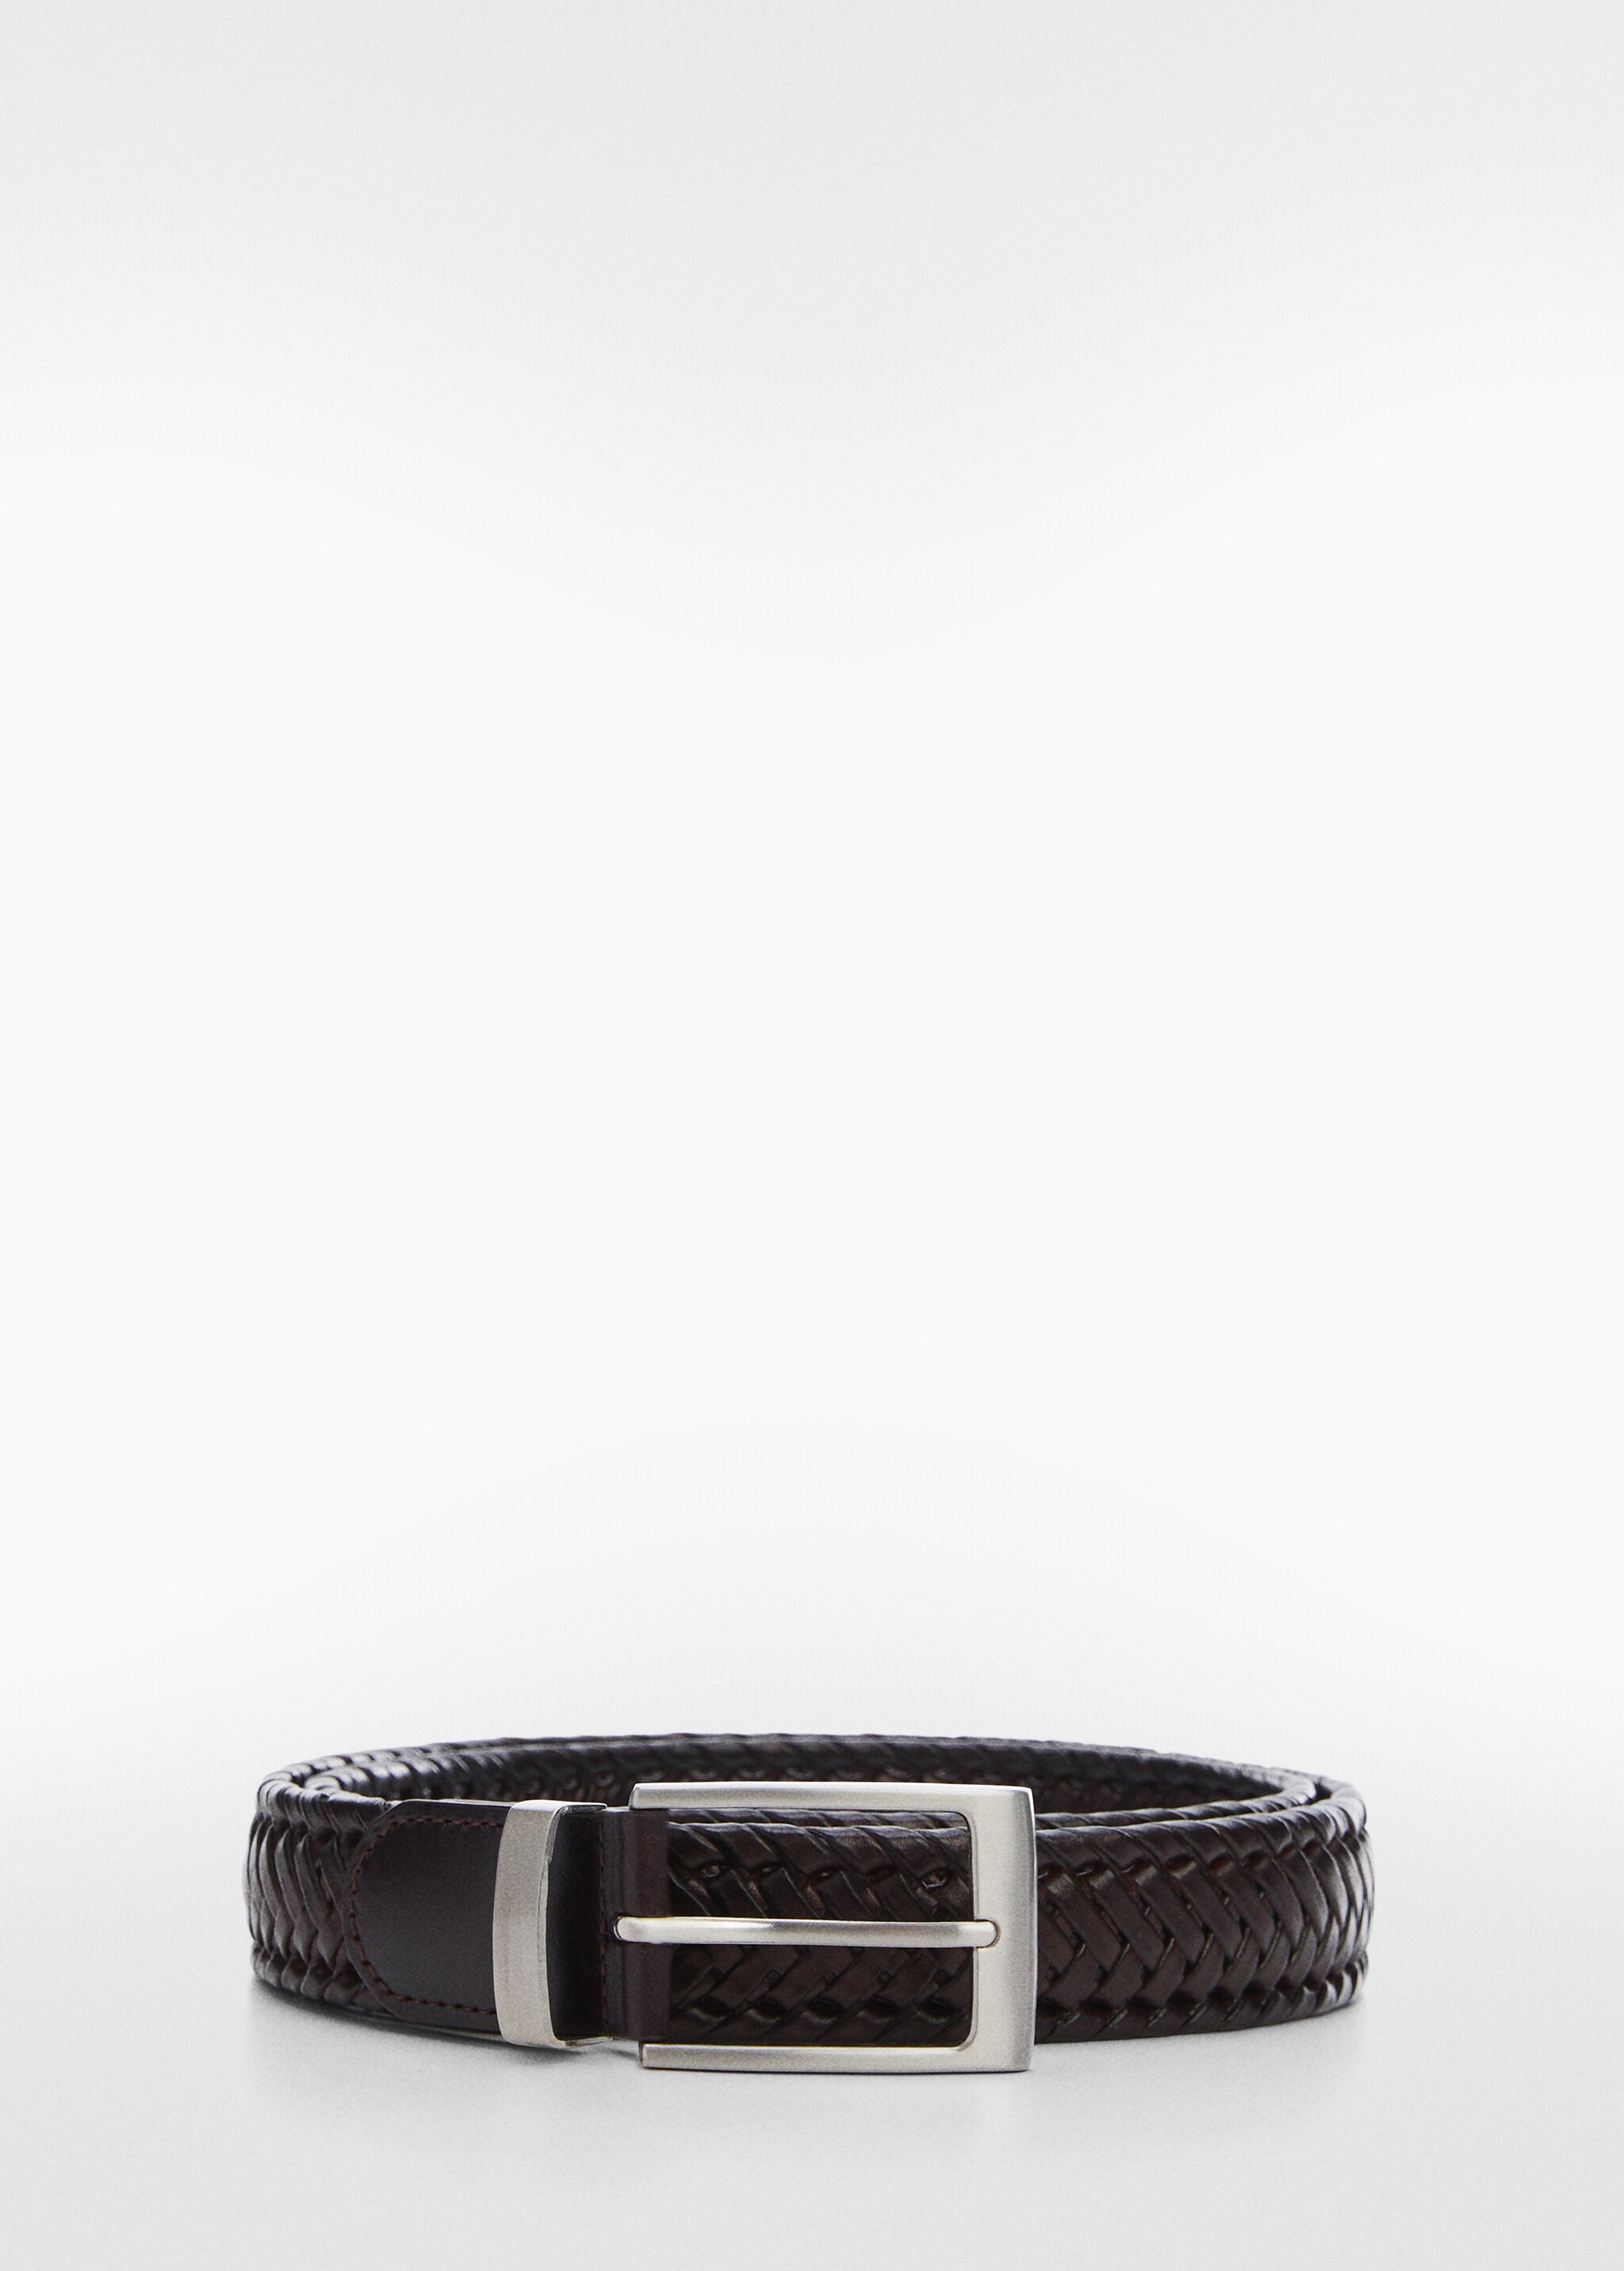 Braided leather belt - Article without model